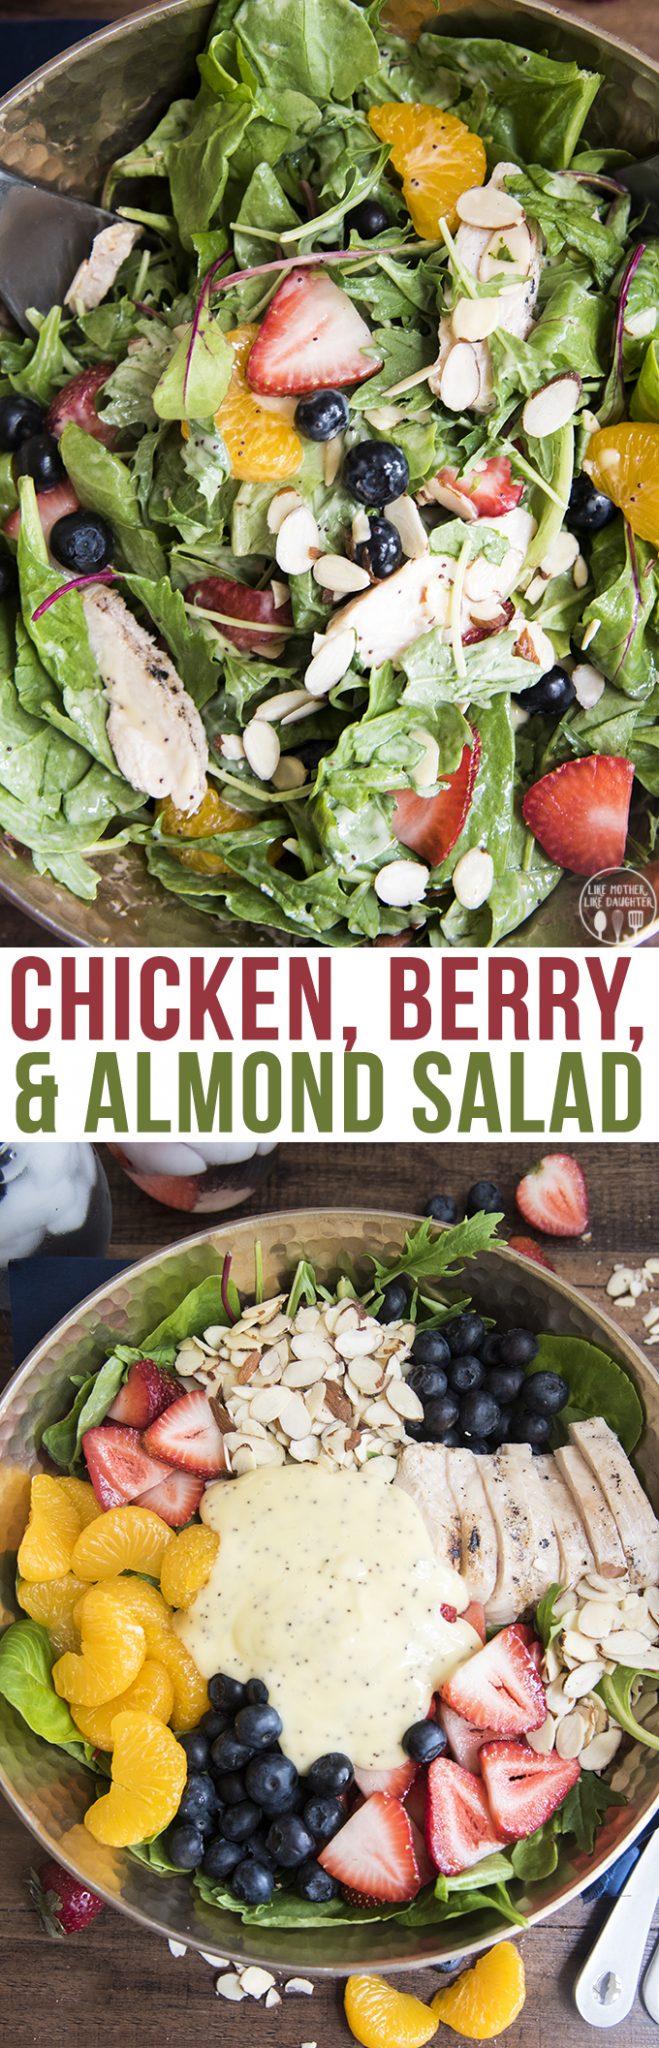 Title card for chicken, berry, and almond salad.